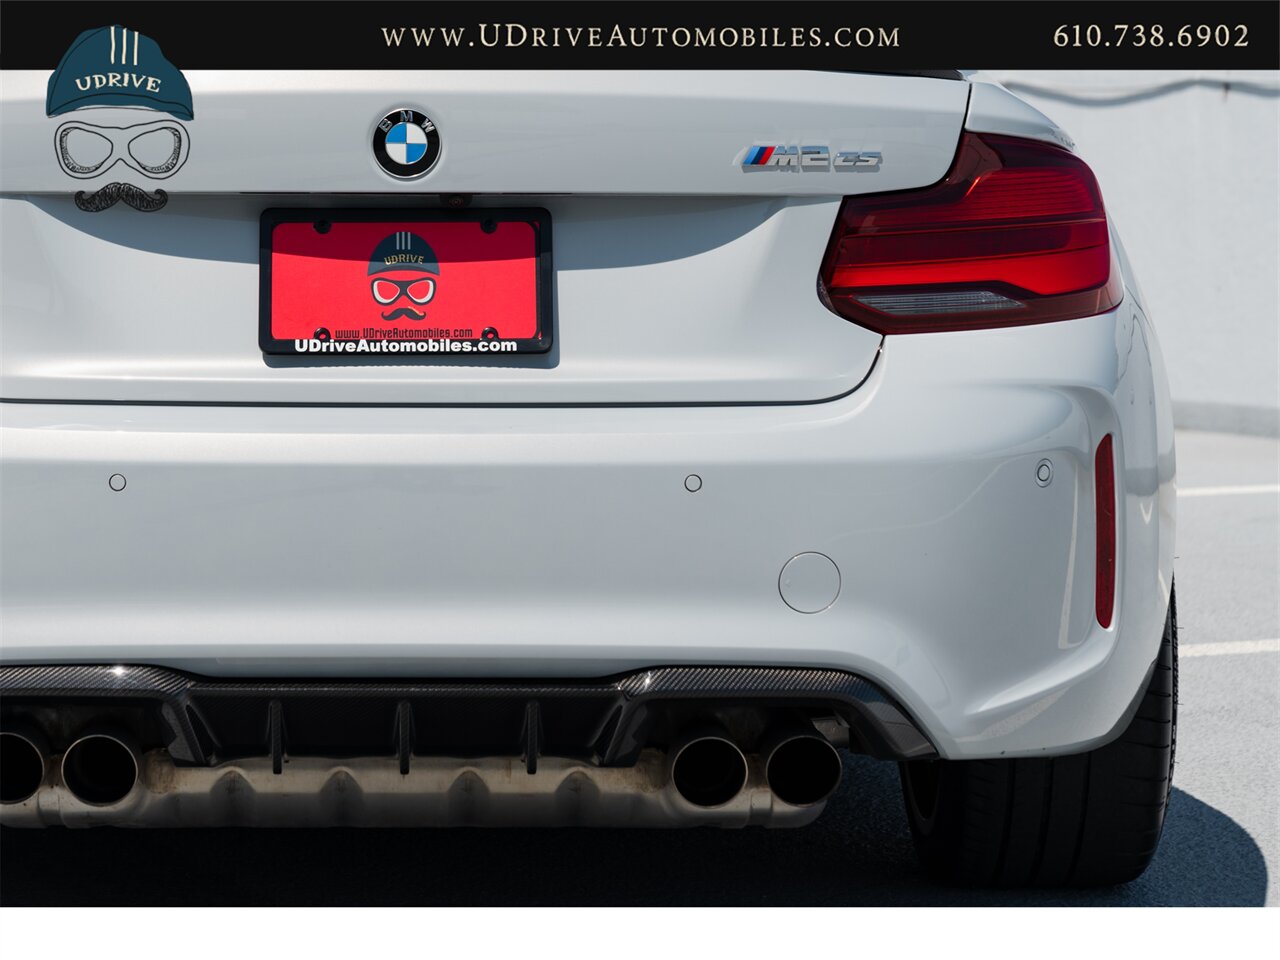 2020 BMW M2 CS  M2 CS 6 Speed Manual 2k Miles Full Body PPF Factory Warranty until 2025 - Photo 20 - West Chester, PA 19382